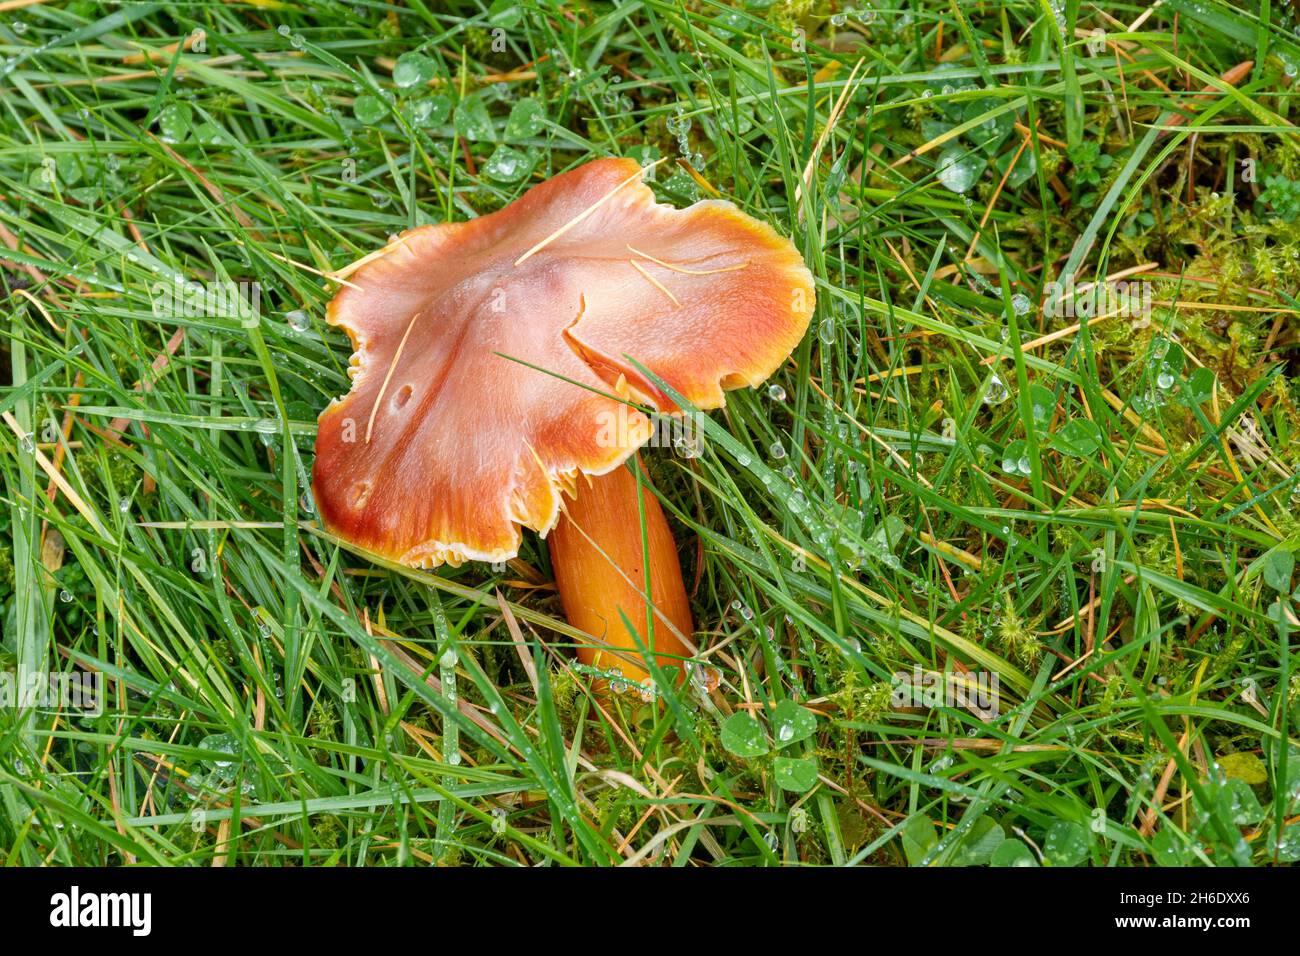 Close-up of an orange-red waxcap toadstool mushroom fungus growing among wet grass during autumn, England, UK (Hygrocybe sp.) Stock Photo